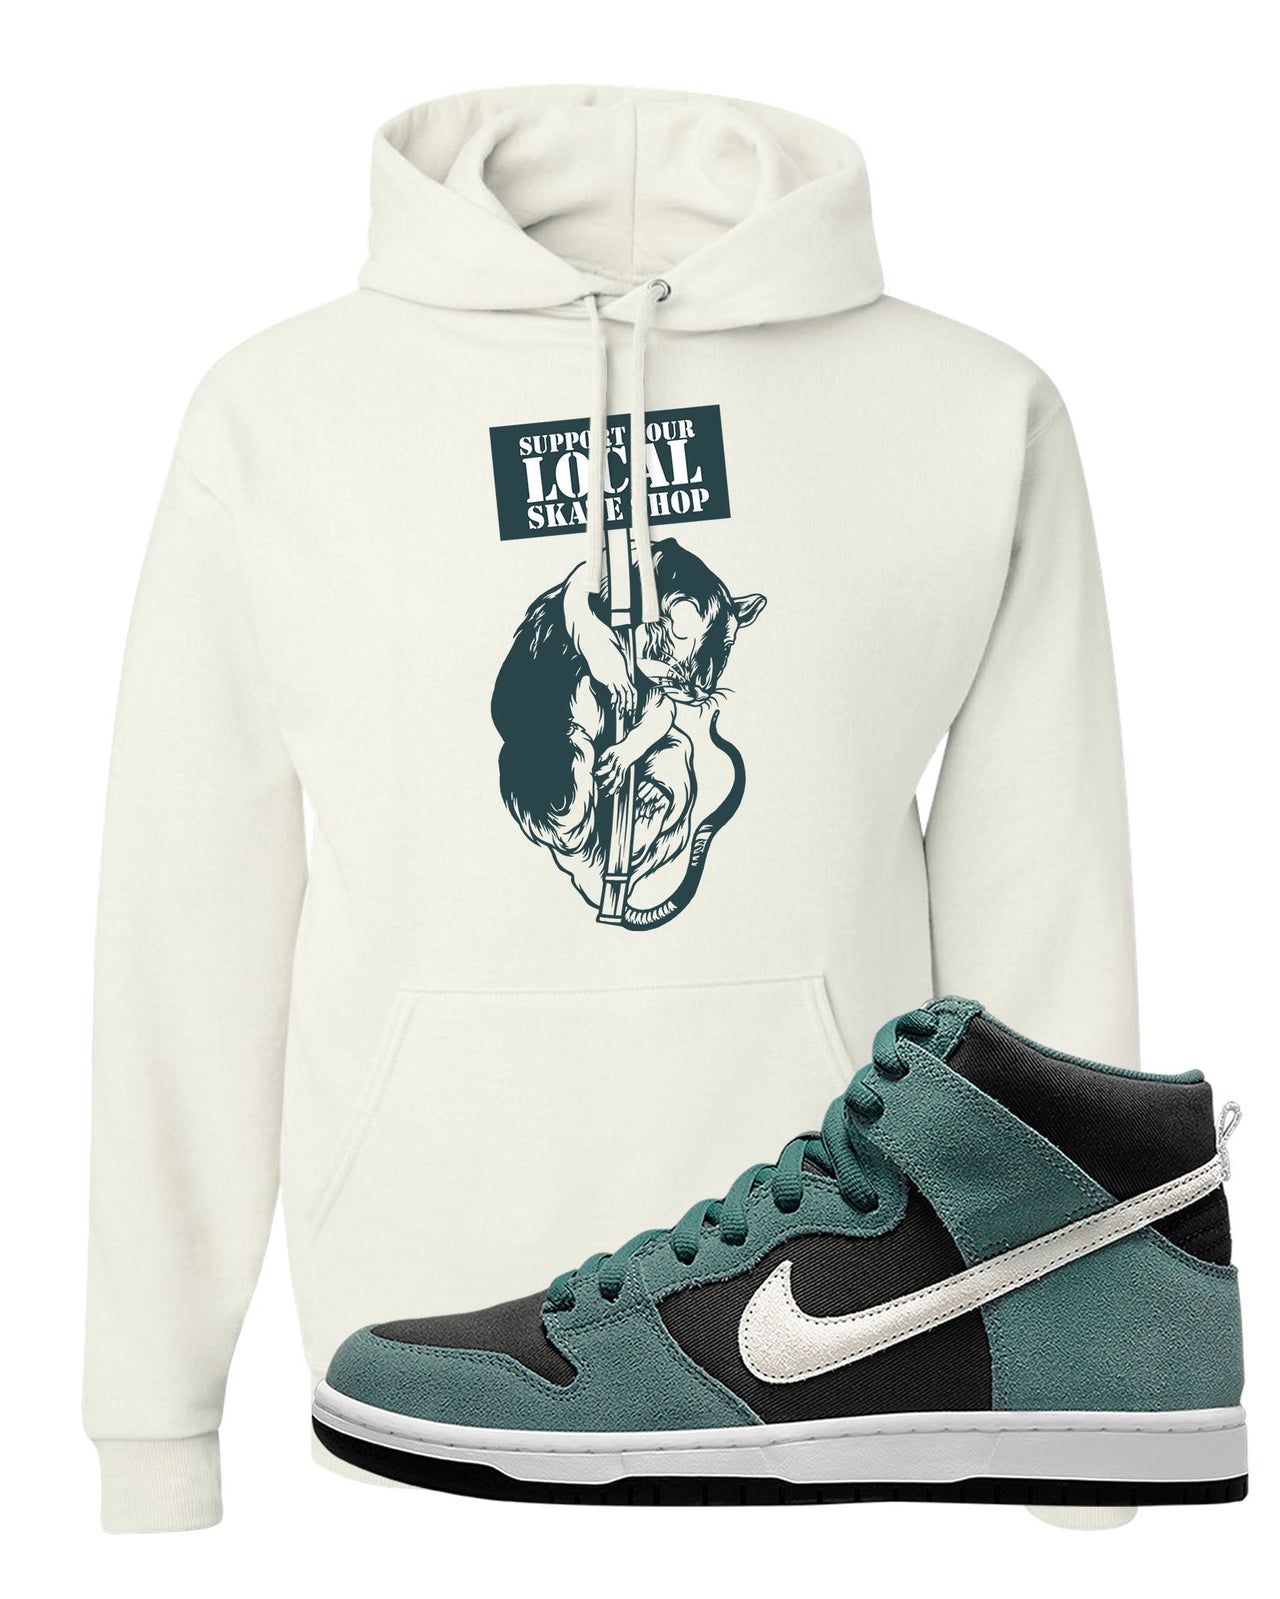 Green Suede High Dunks Hoodie | Support Your Local Skate Shop, White